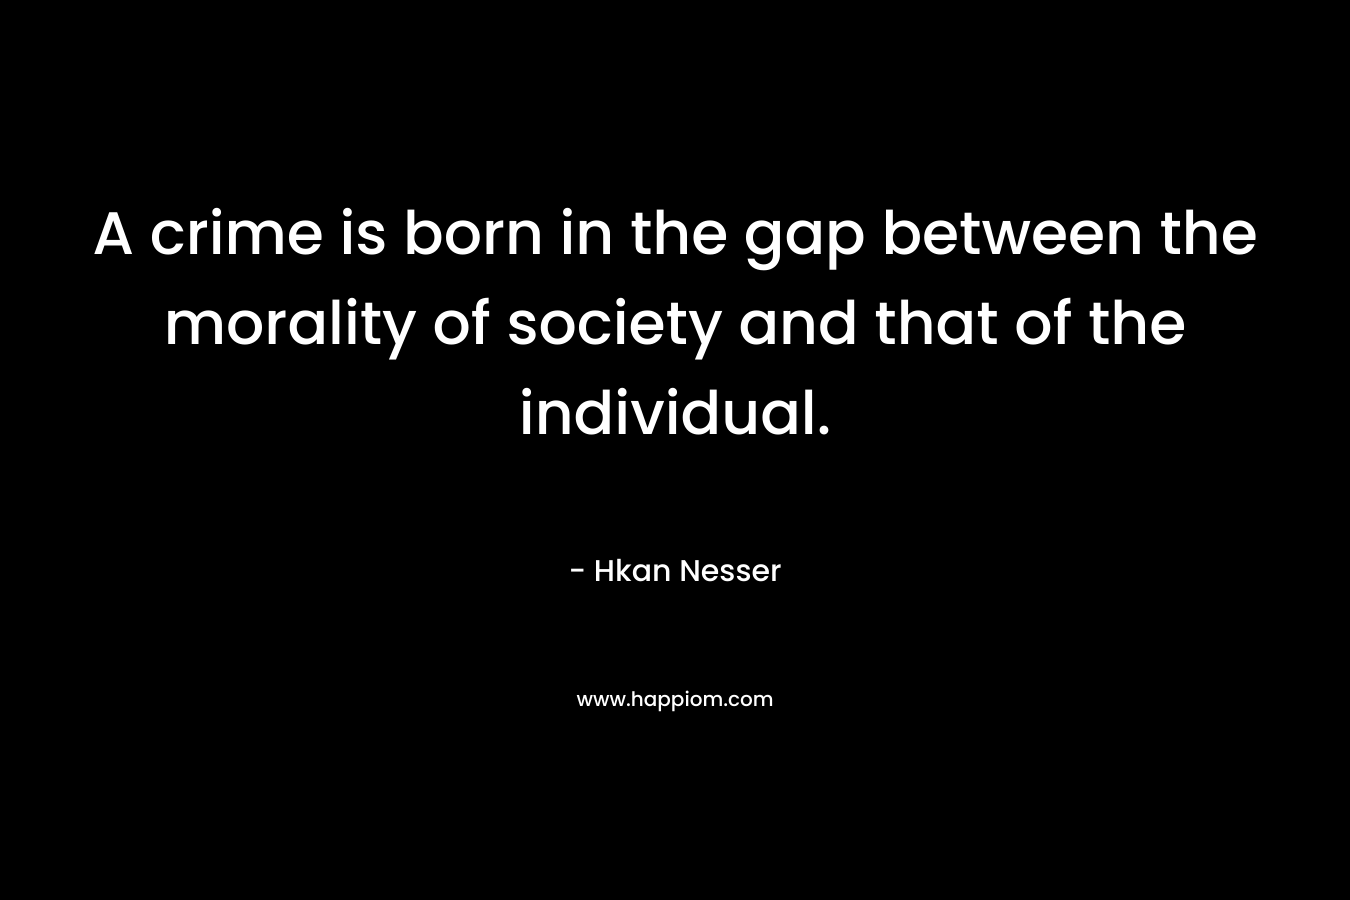 A crime is born in the gap between the morality of society and that of the individual.